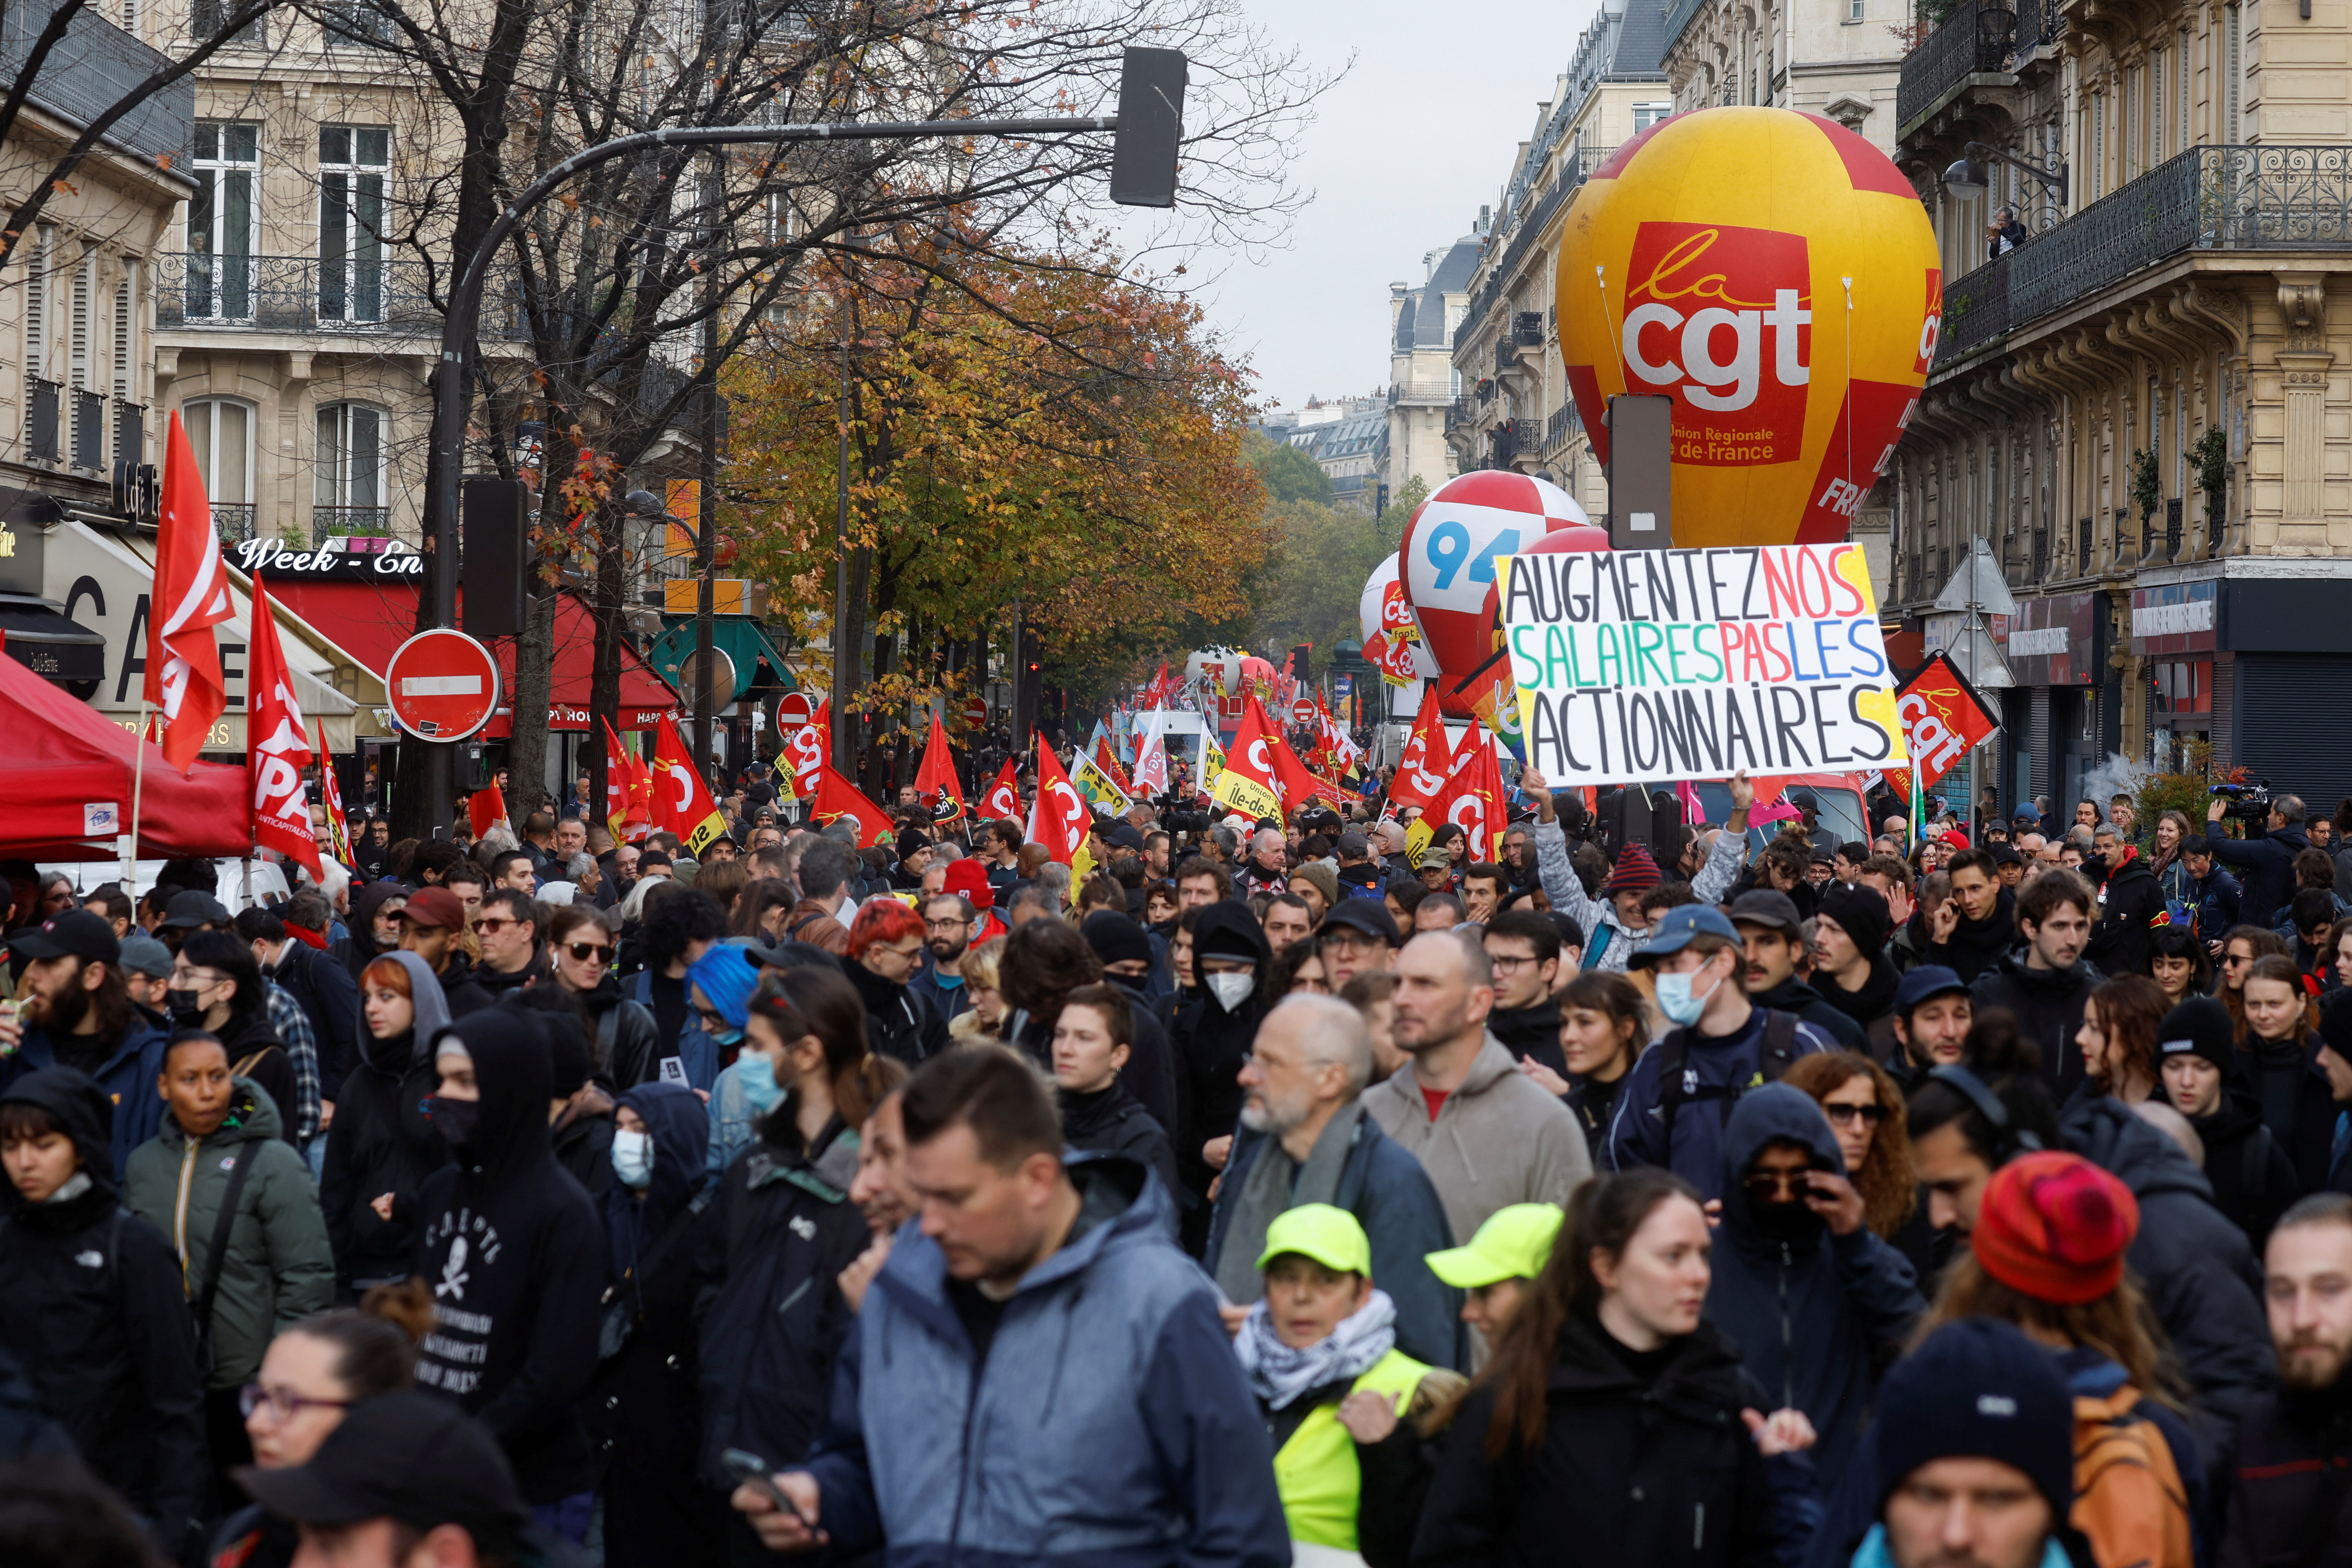 Nationwide strike and protests for wages and pensions in France